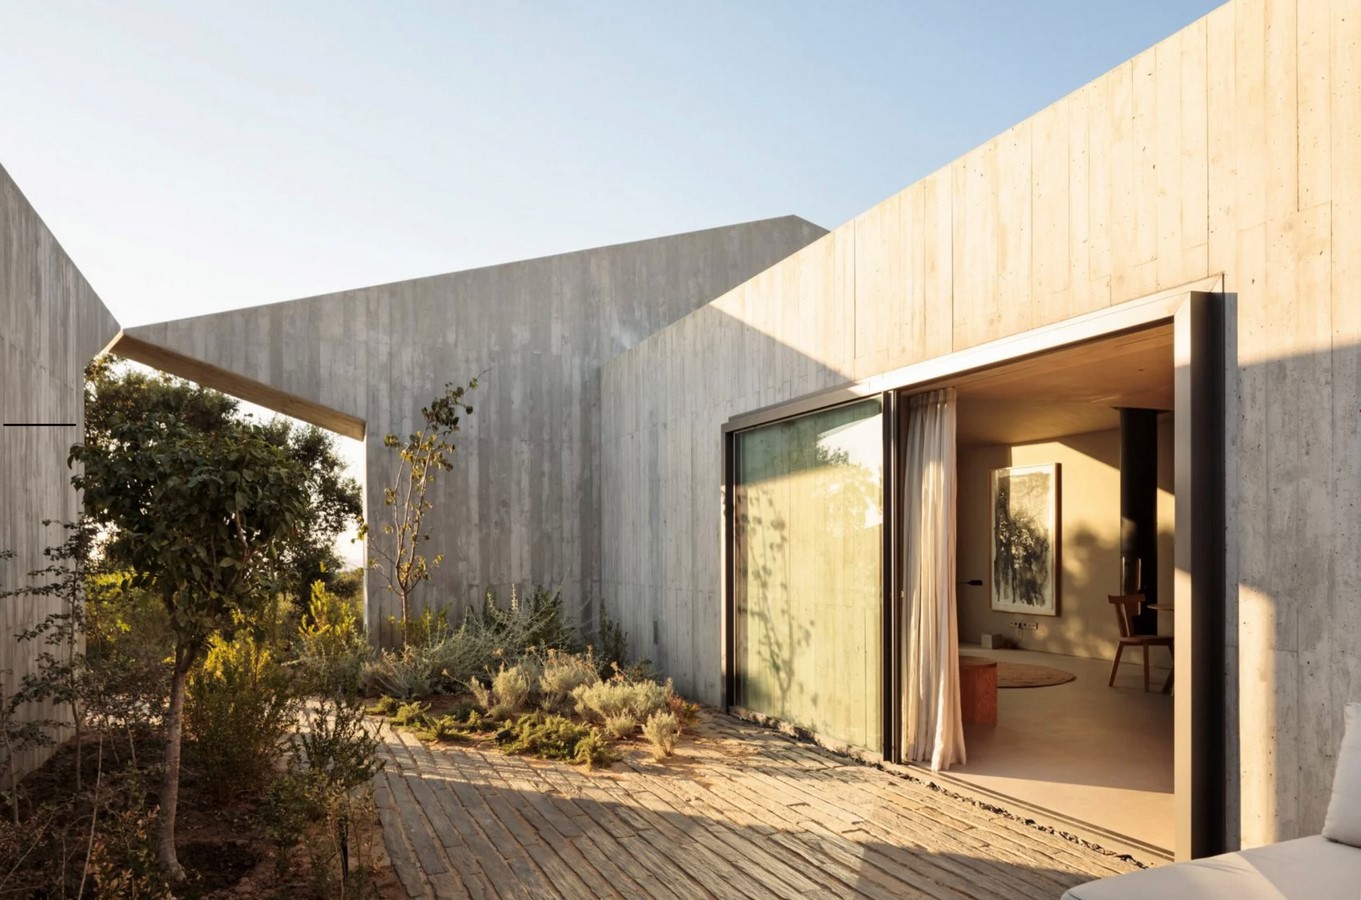 Minimalist concrete holiday homes with matching cutaways built by Manuel Aires Mateus - Sheet5